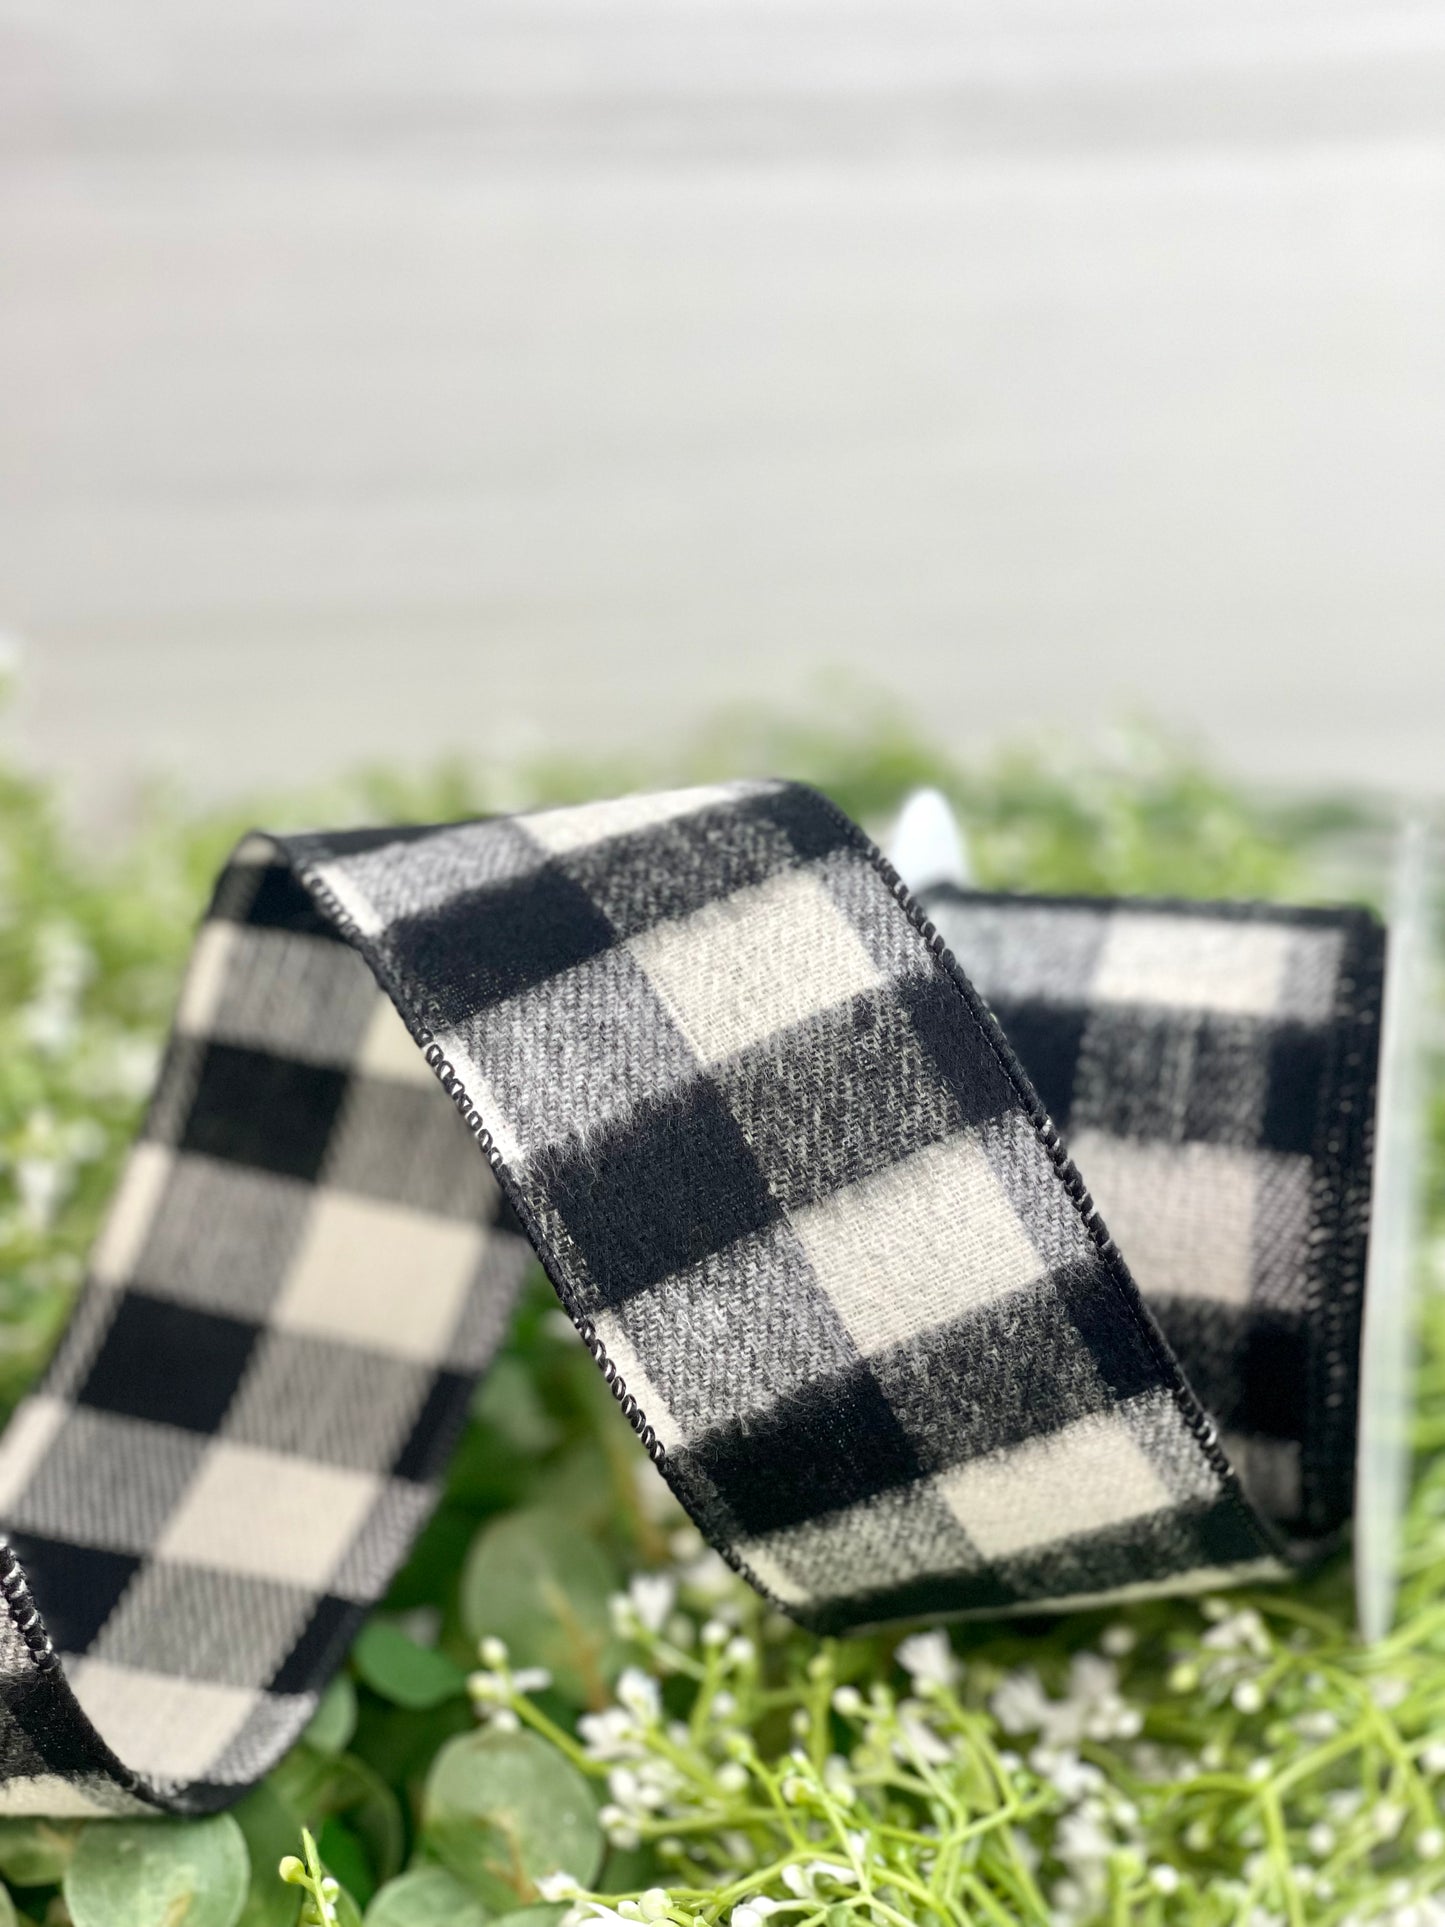 2.5 Inch By 10 Yard Black And Ivory Flannel Check Ribbon